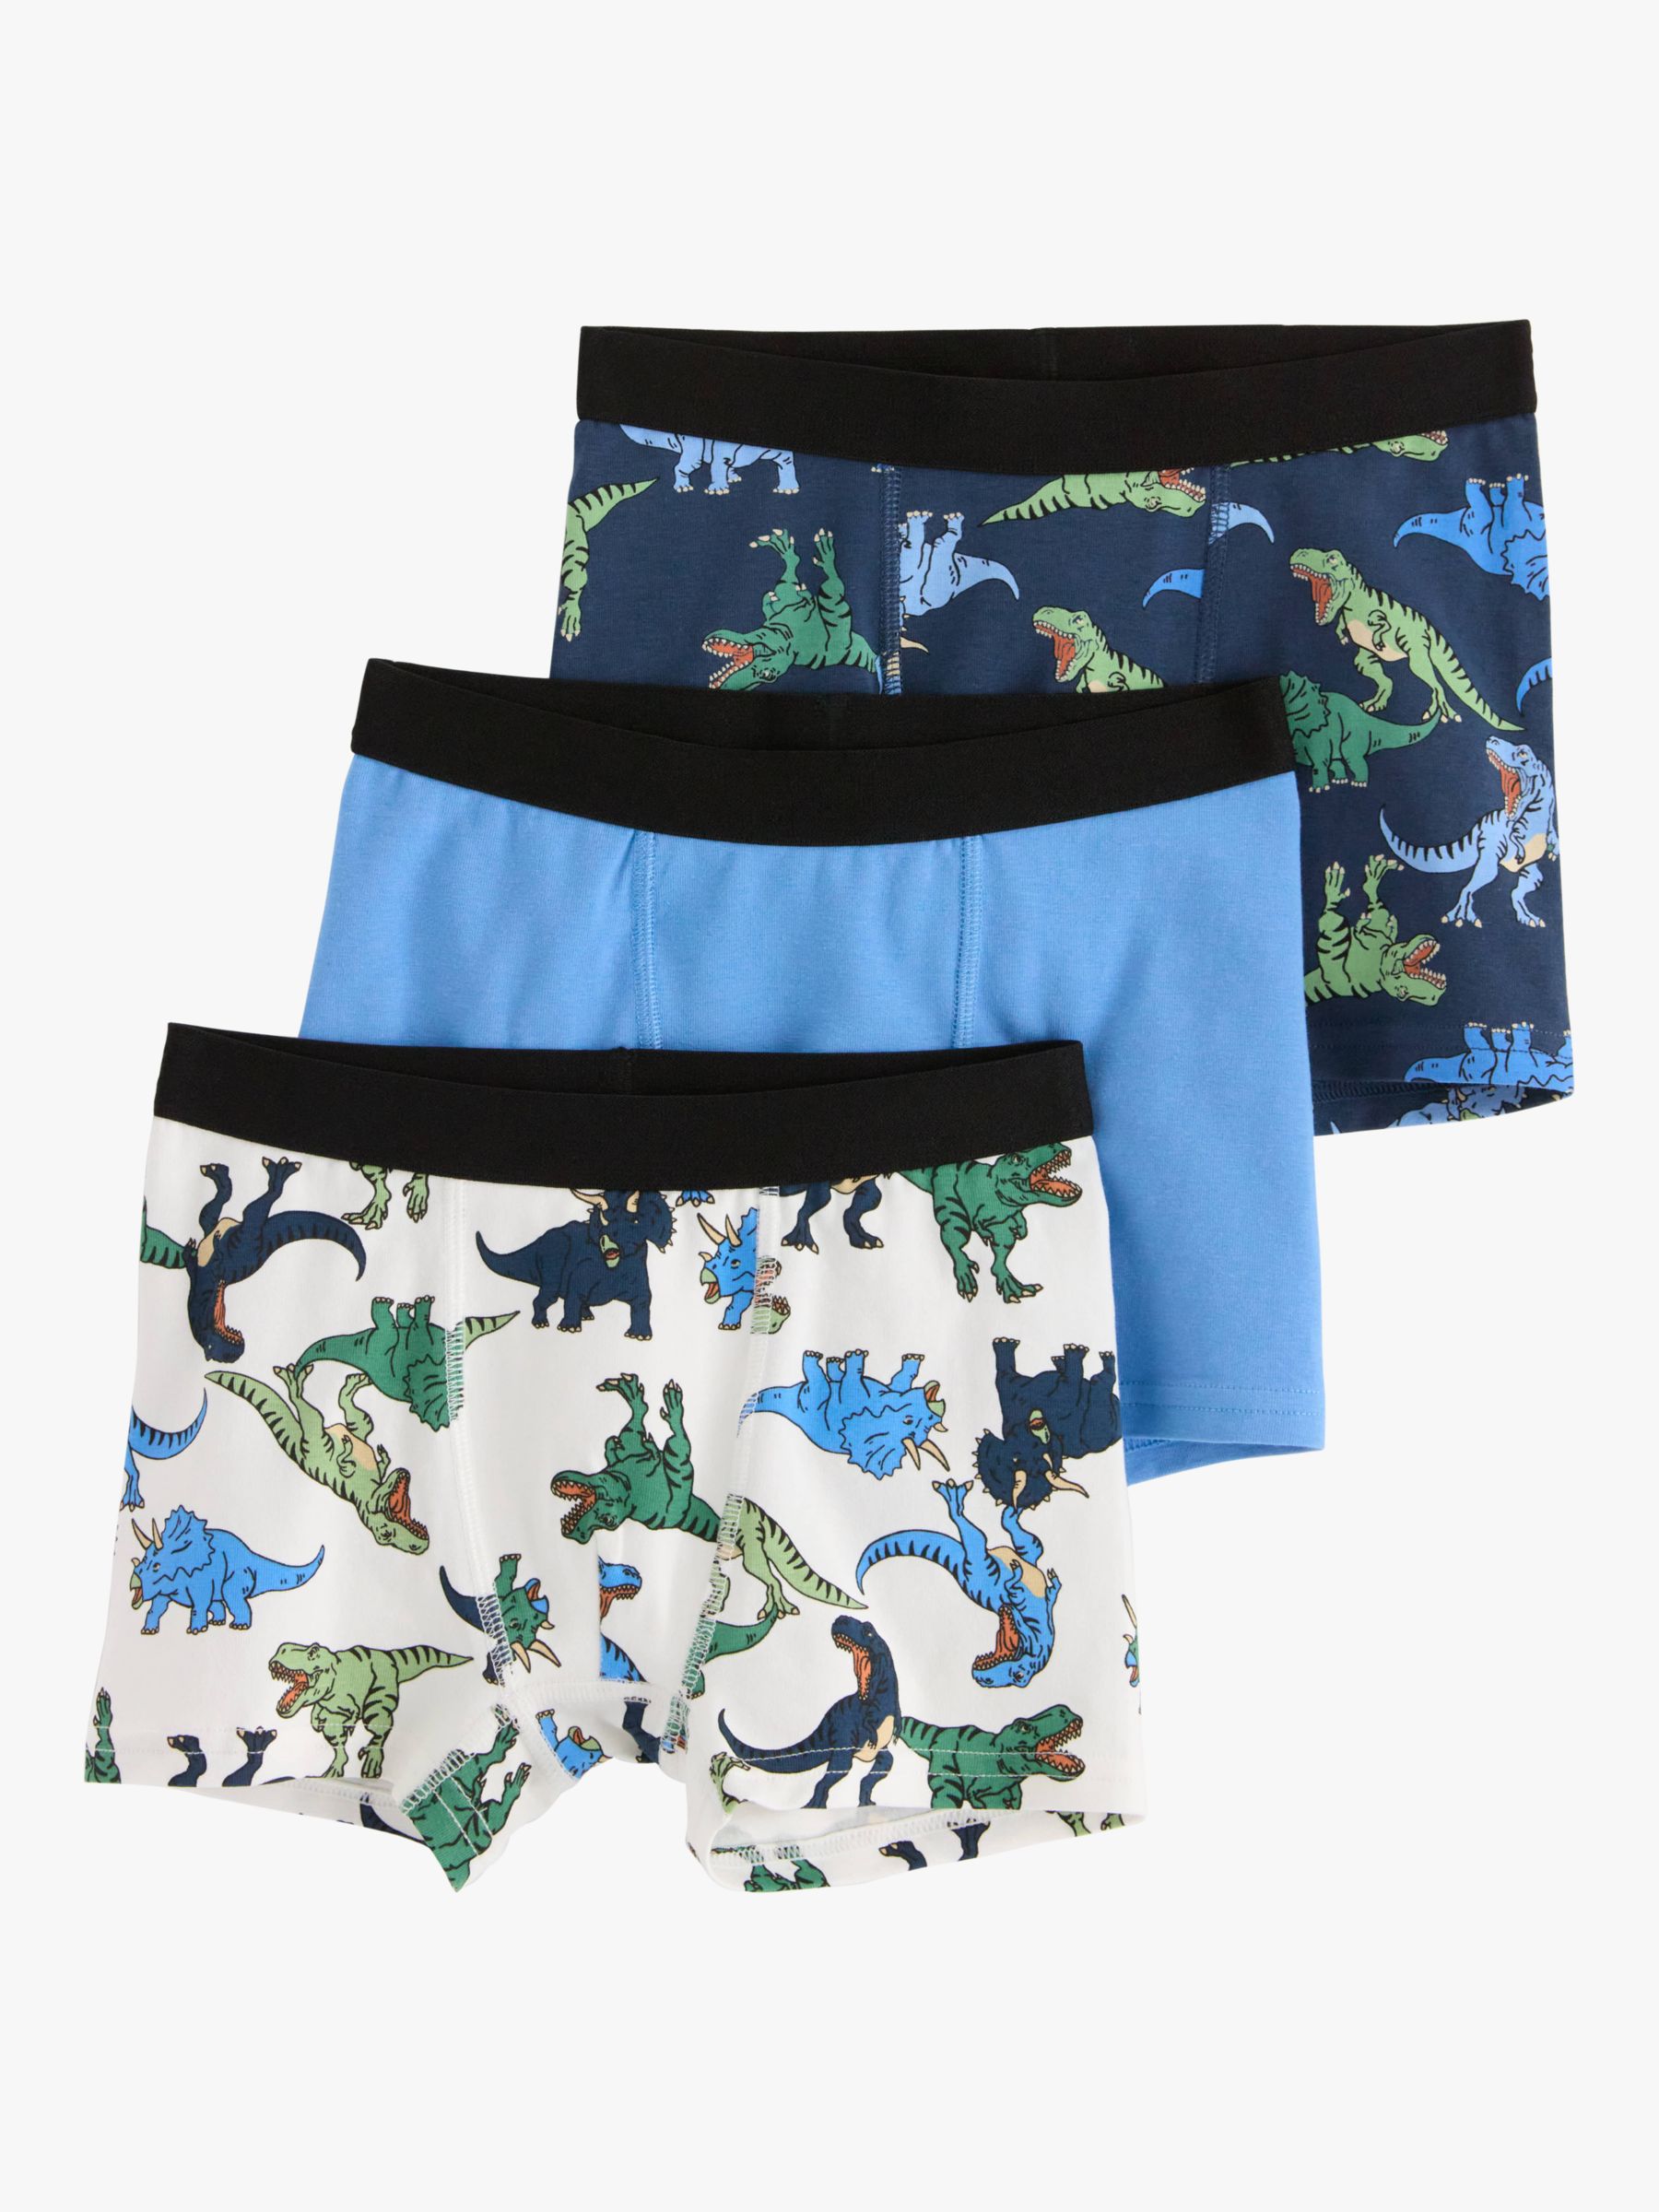 Lindex Kids' Dino Print Wide Band Boxers, Pack of 3, White/Blue/Multi, 4-6 years